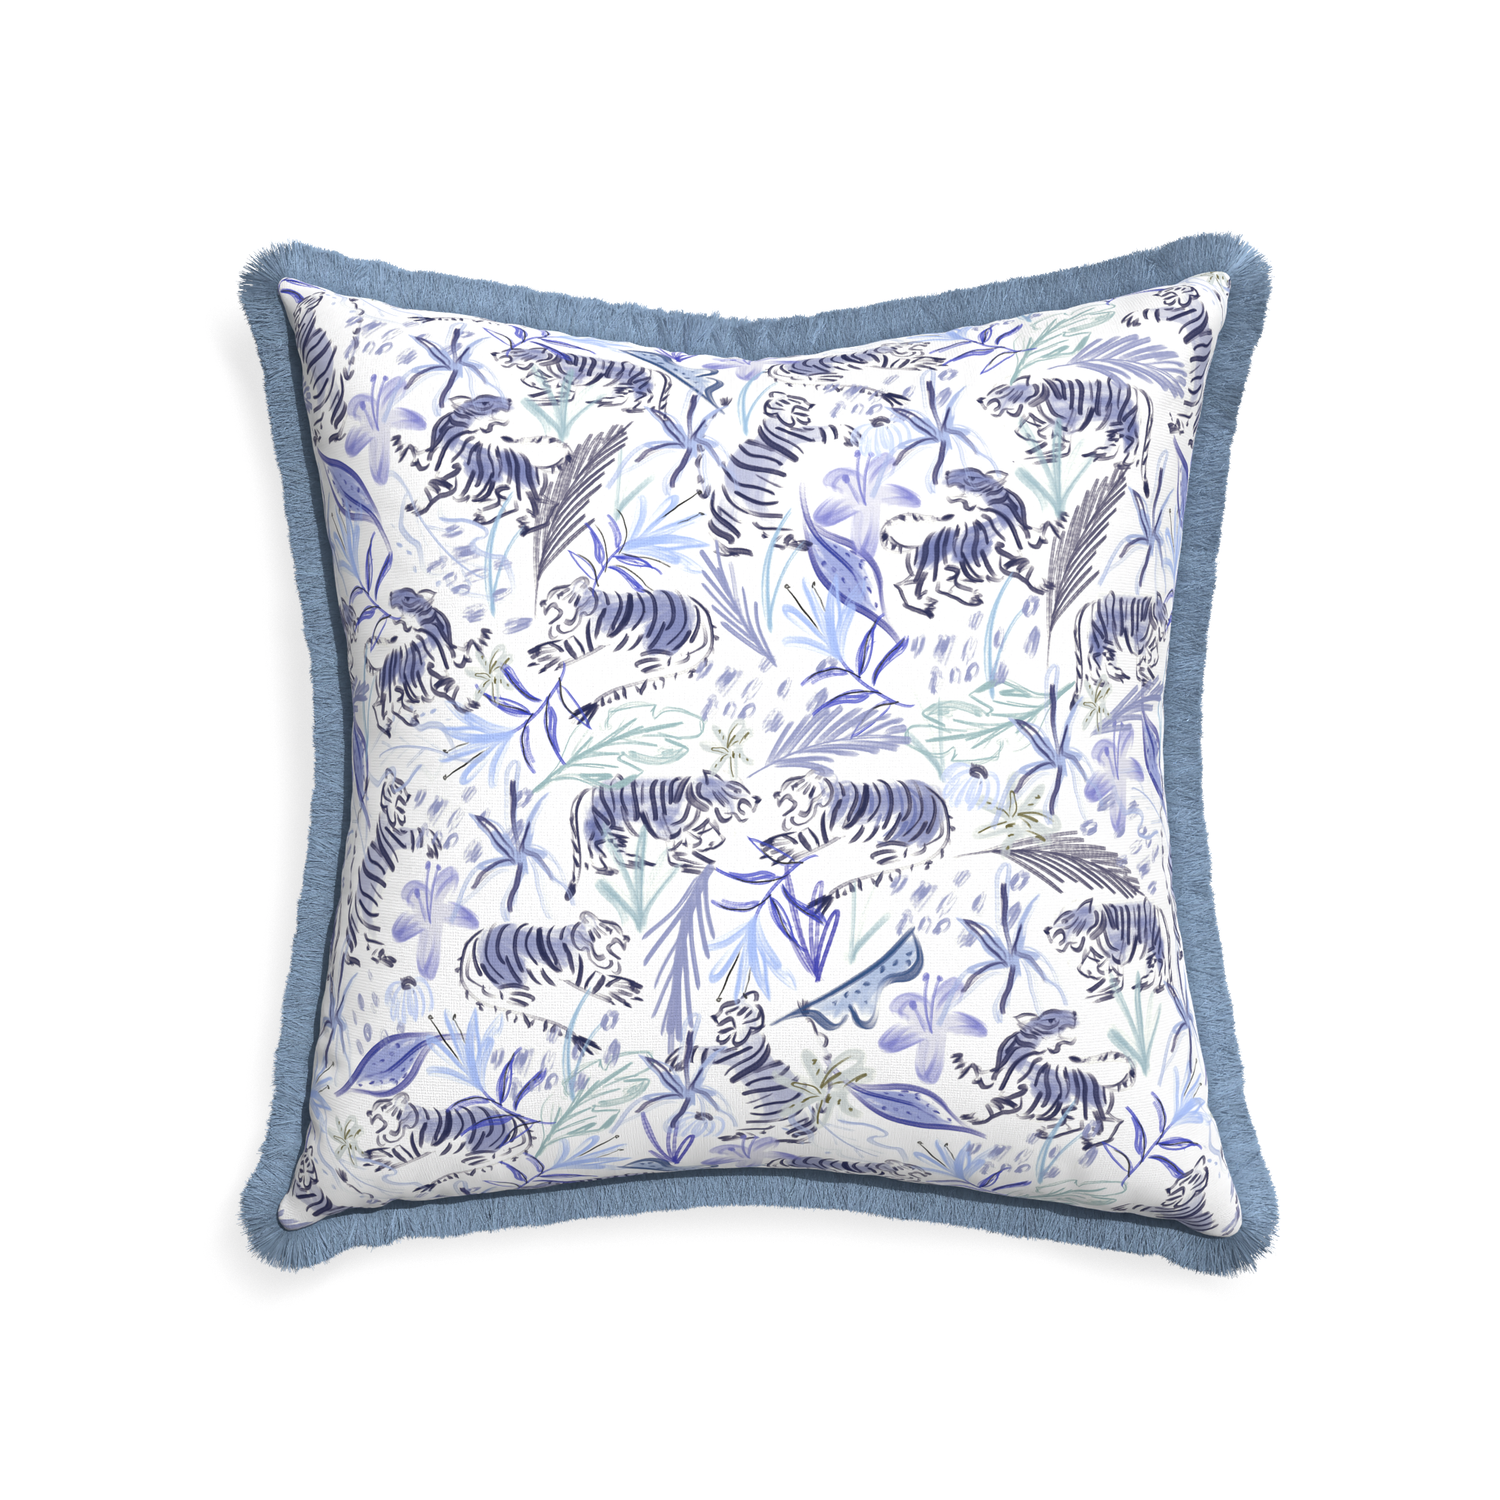 22-square frida blue custom blue with intricate tiger designpillow with sky fringe on white background